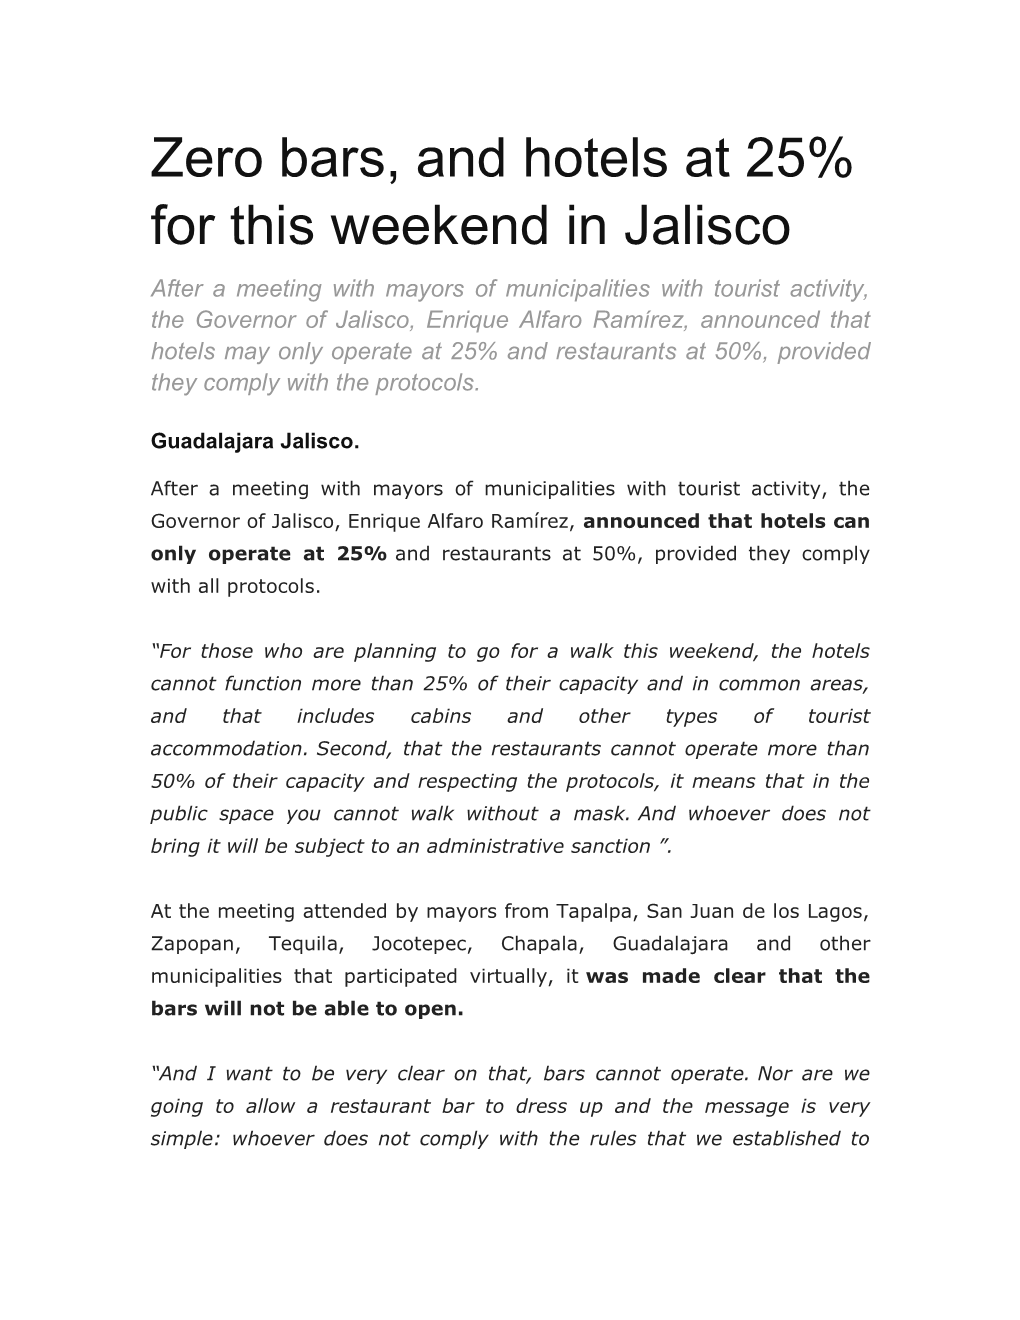 Zero Bars, and Hotels at 25% for This Weekend in Jalisco